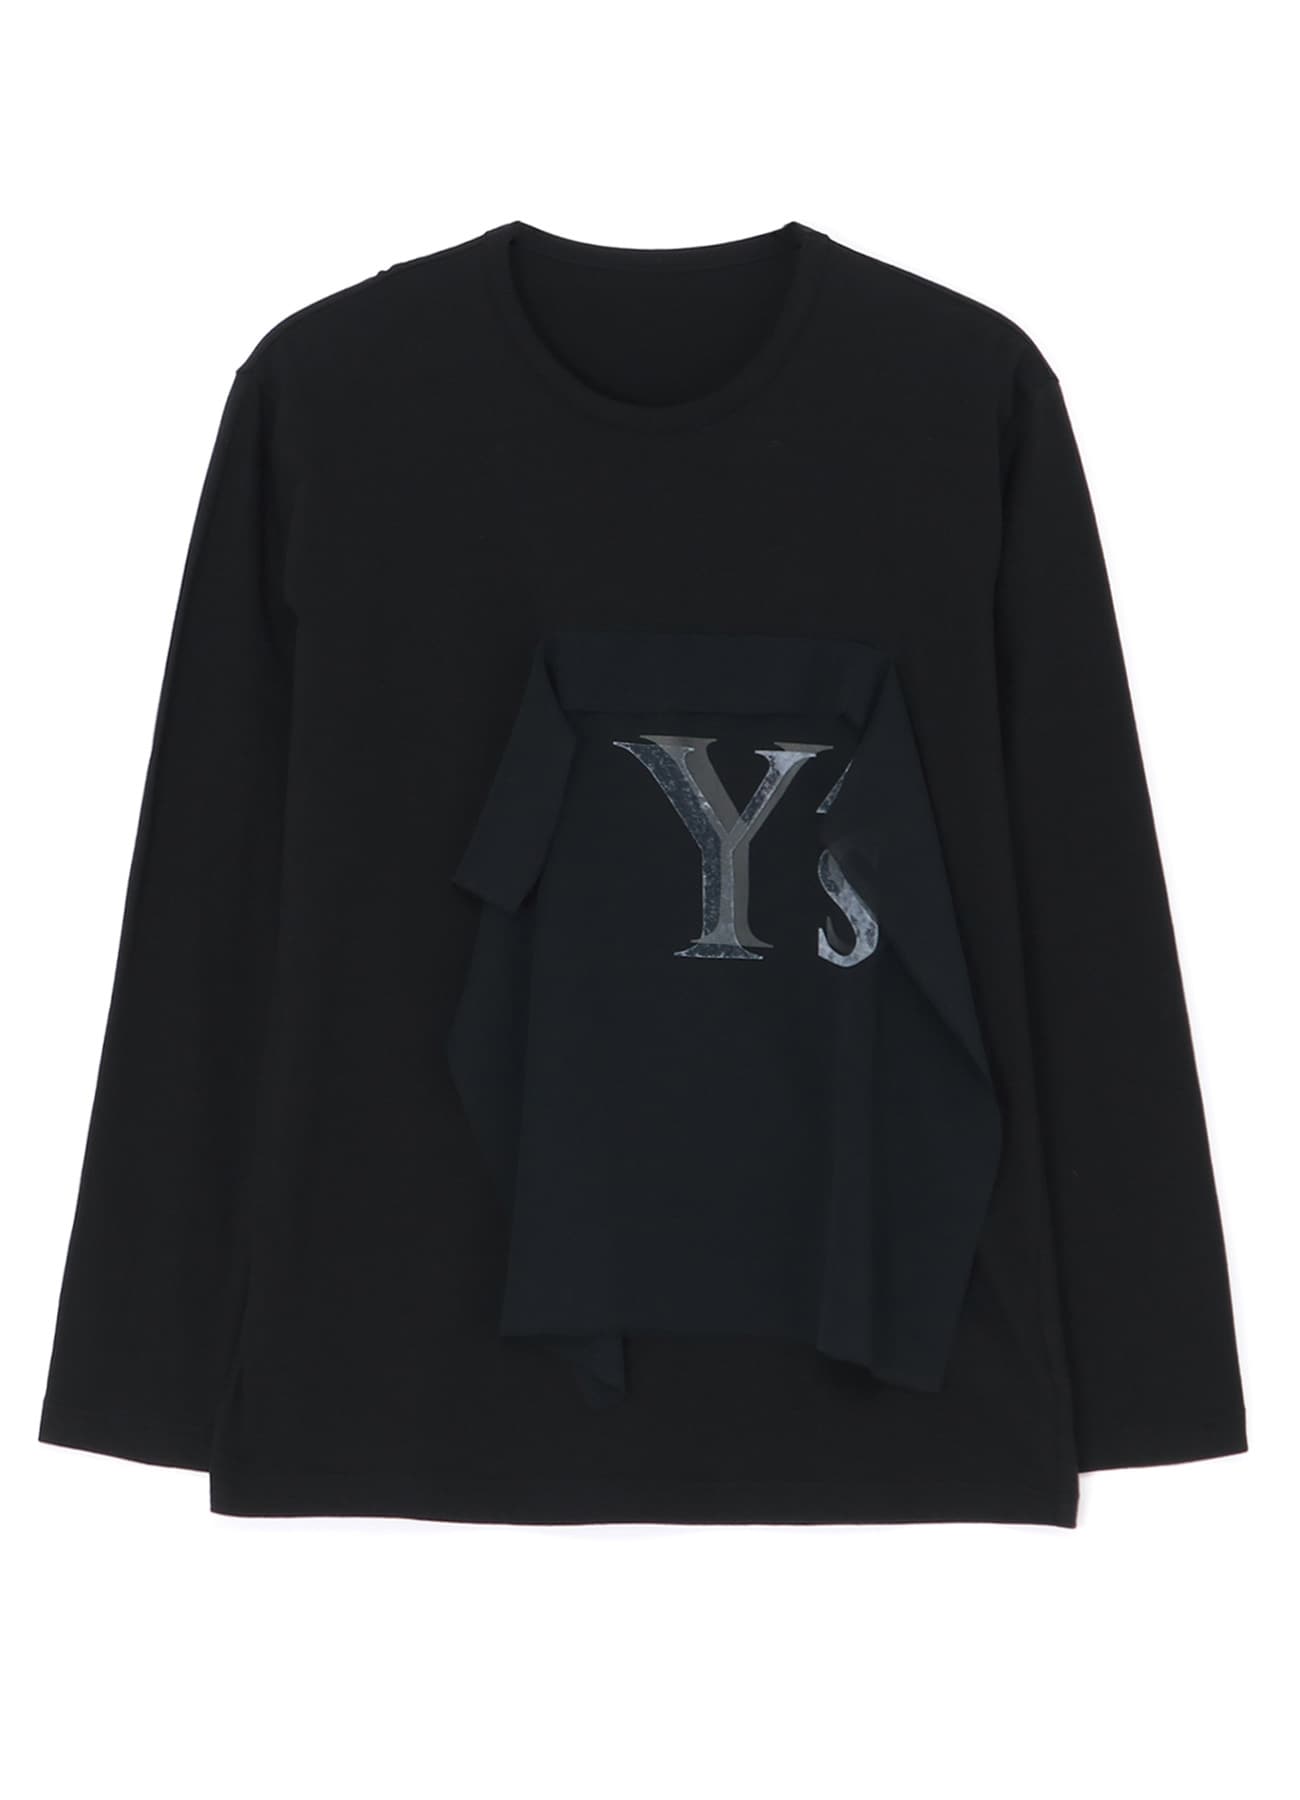 PLAIN STITCH x GEORGETTE Y's PATCH-WORKED LONG SLEEVES T